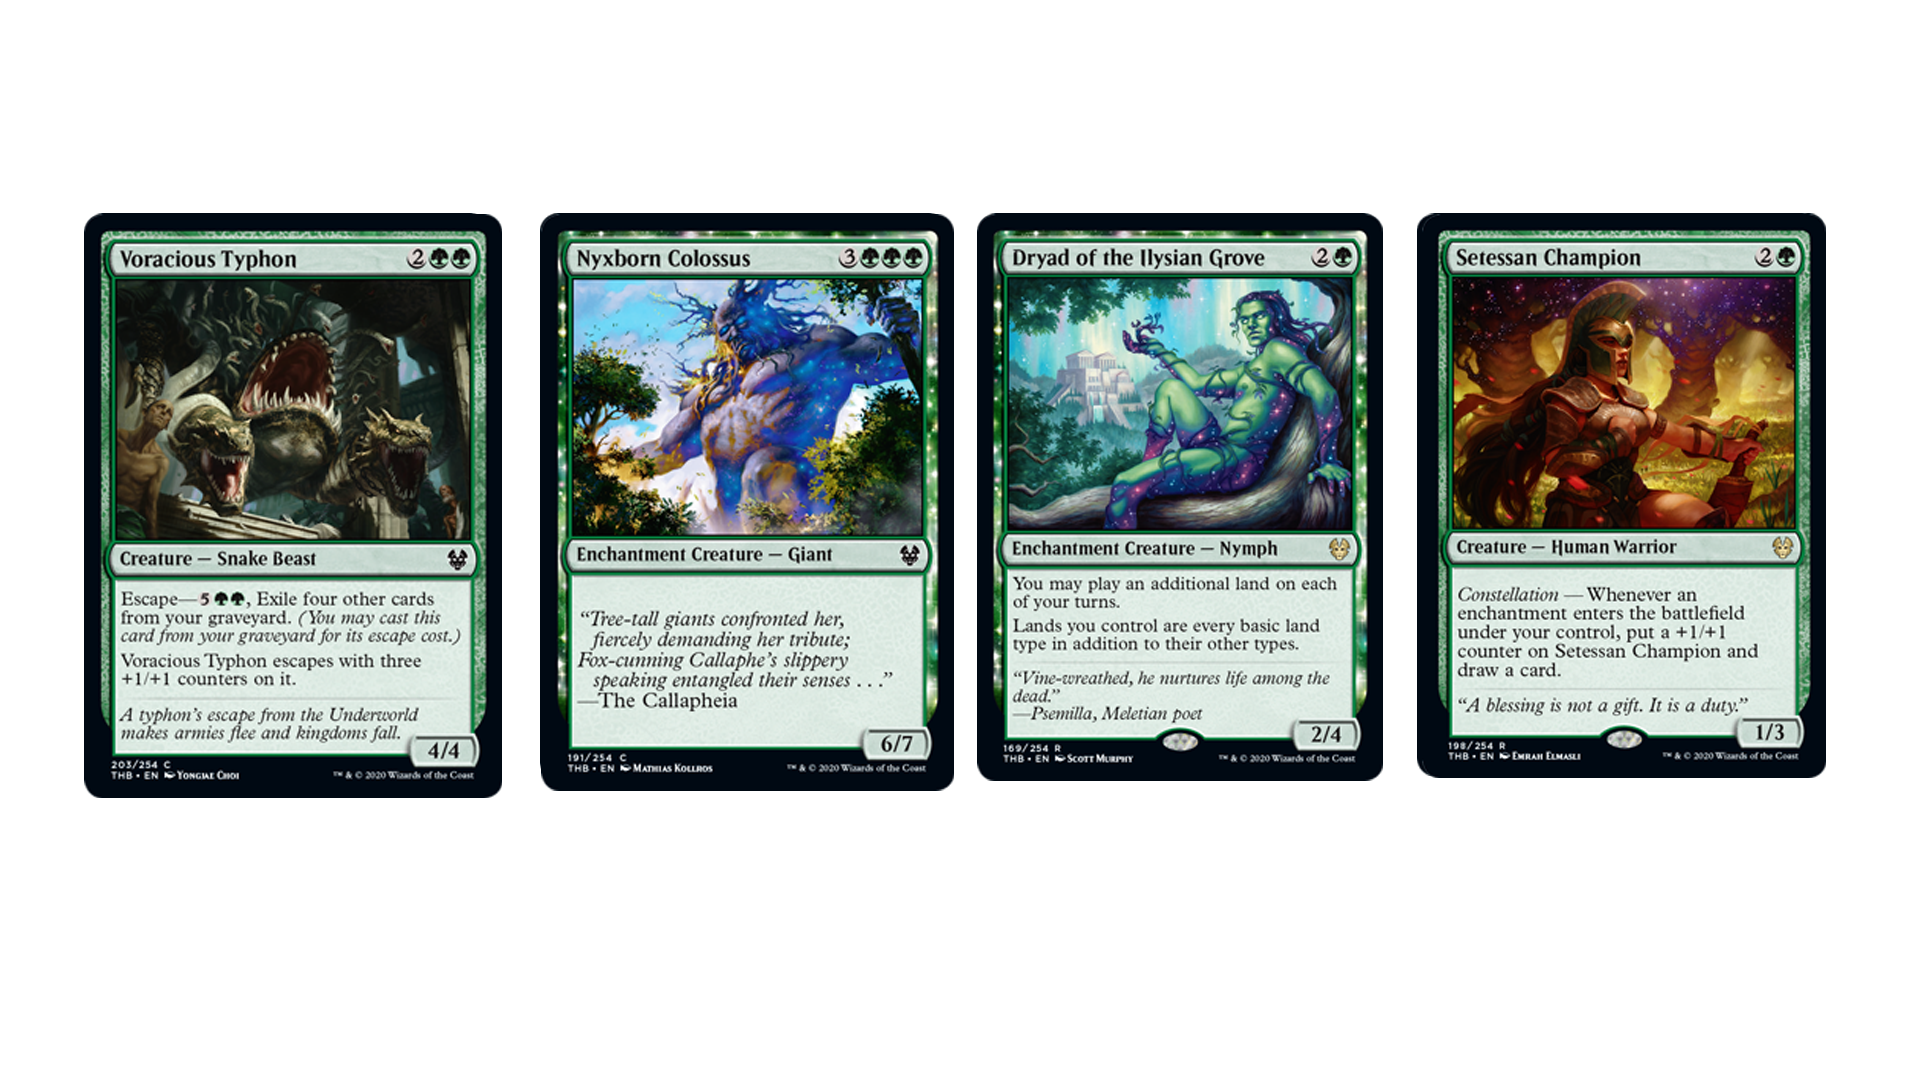 Magic: The Gathering - Theros: Beyond Death's Green cards, including Voracious Typhoon, Nyxborn Colossus, Dryad of the Ilysian Grove and Setessan Champion